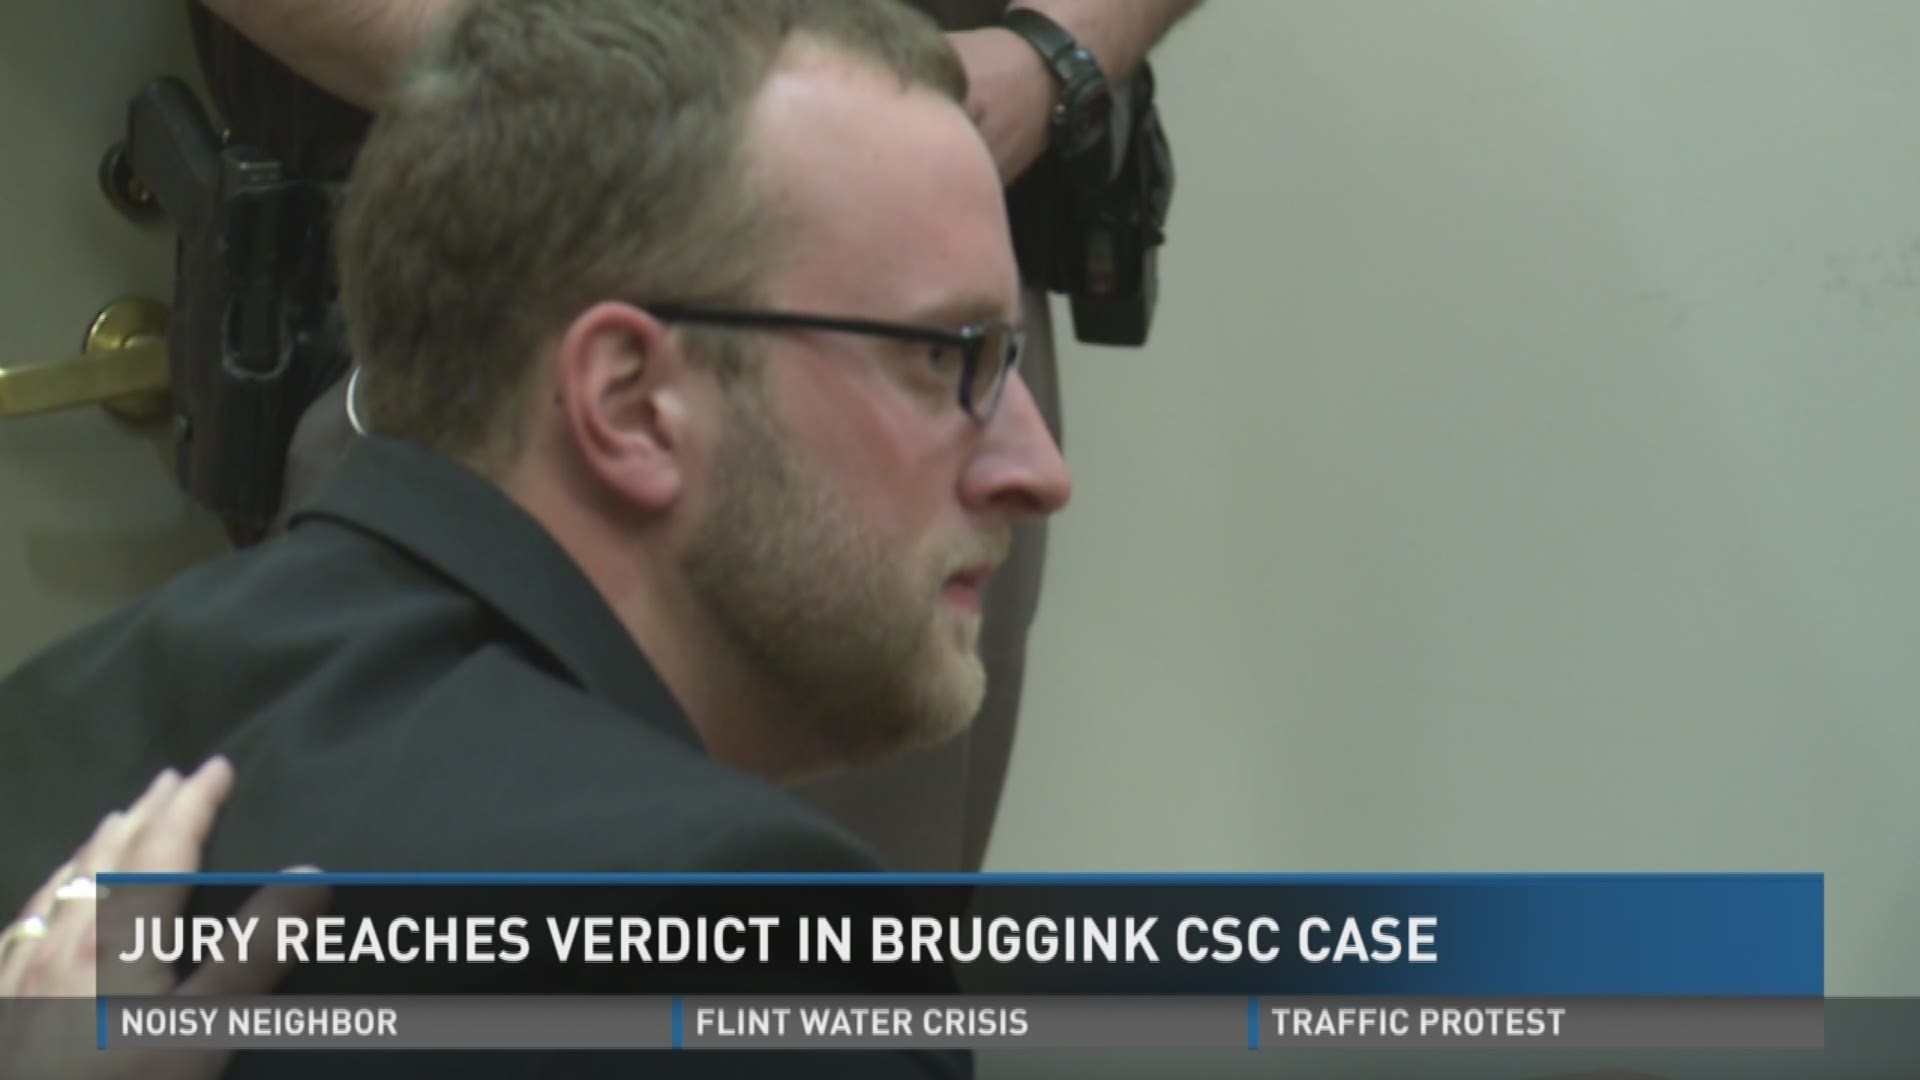 Ryan Bruggink faces up to 15 years in prison.